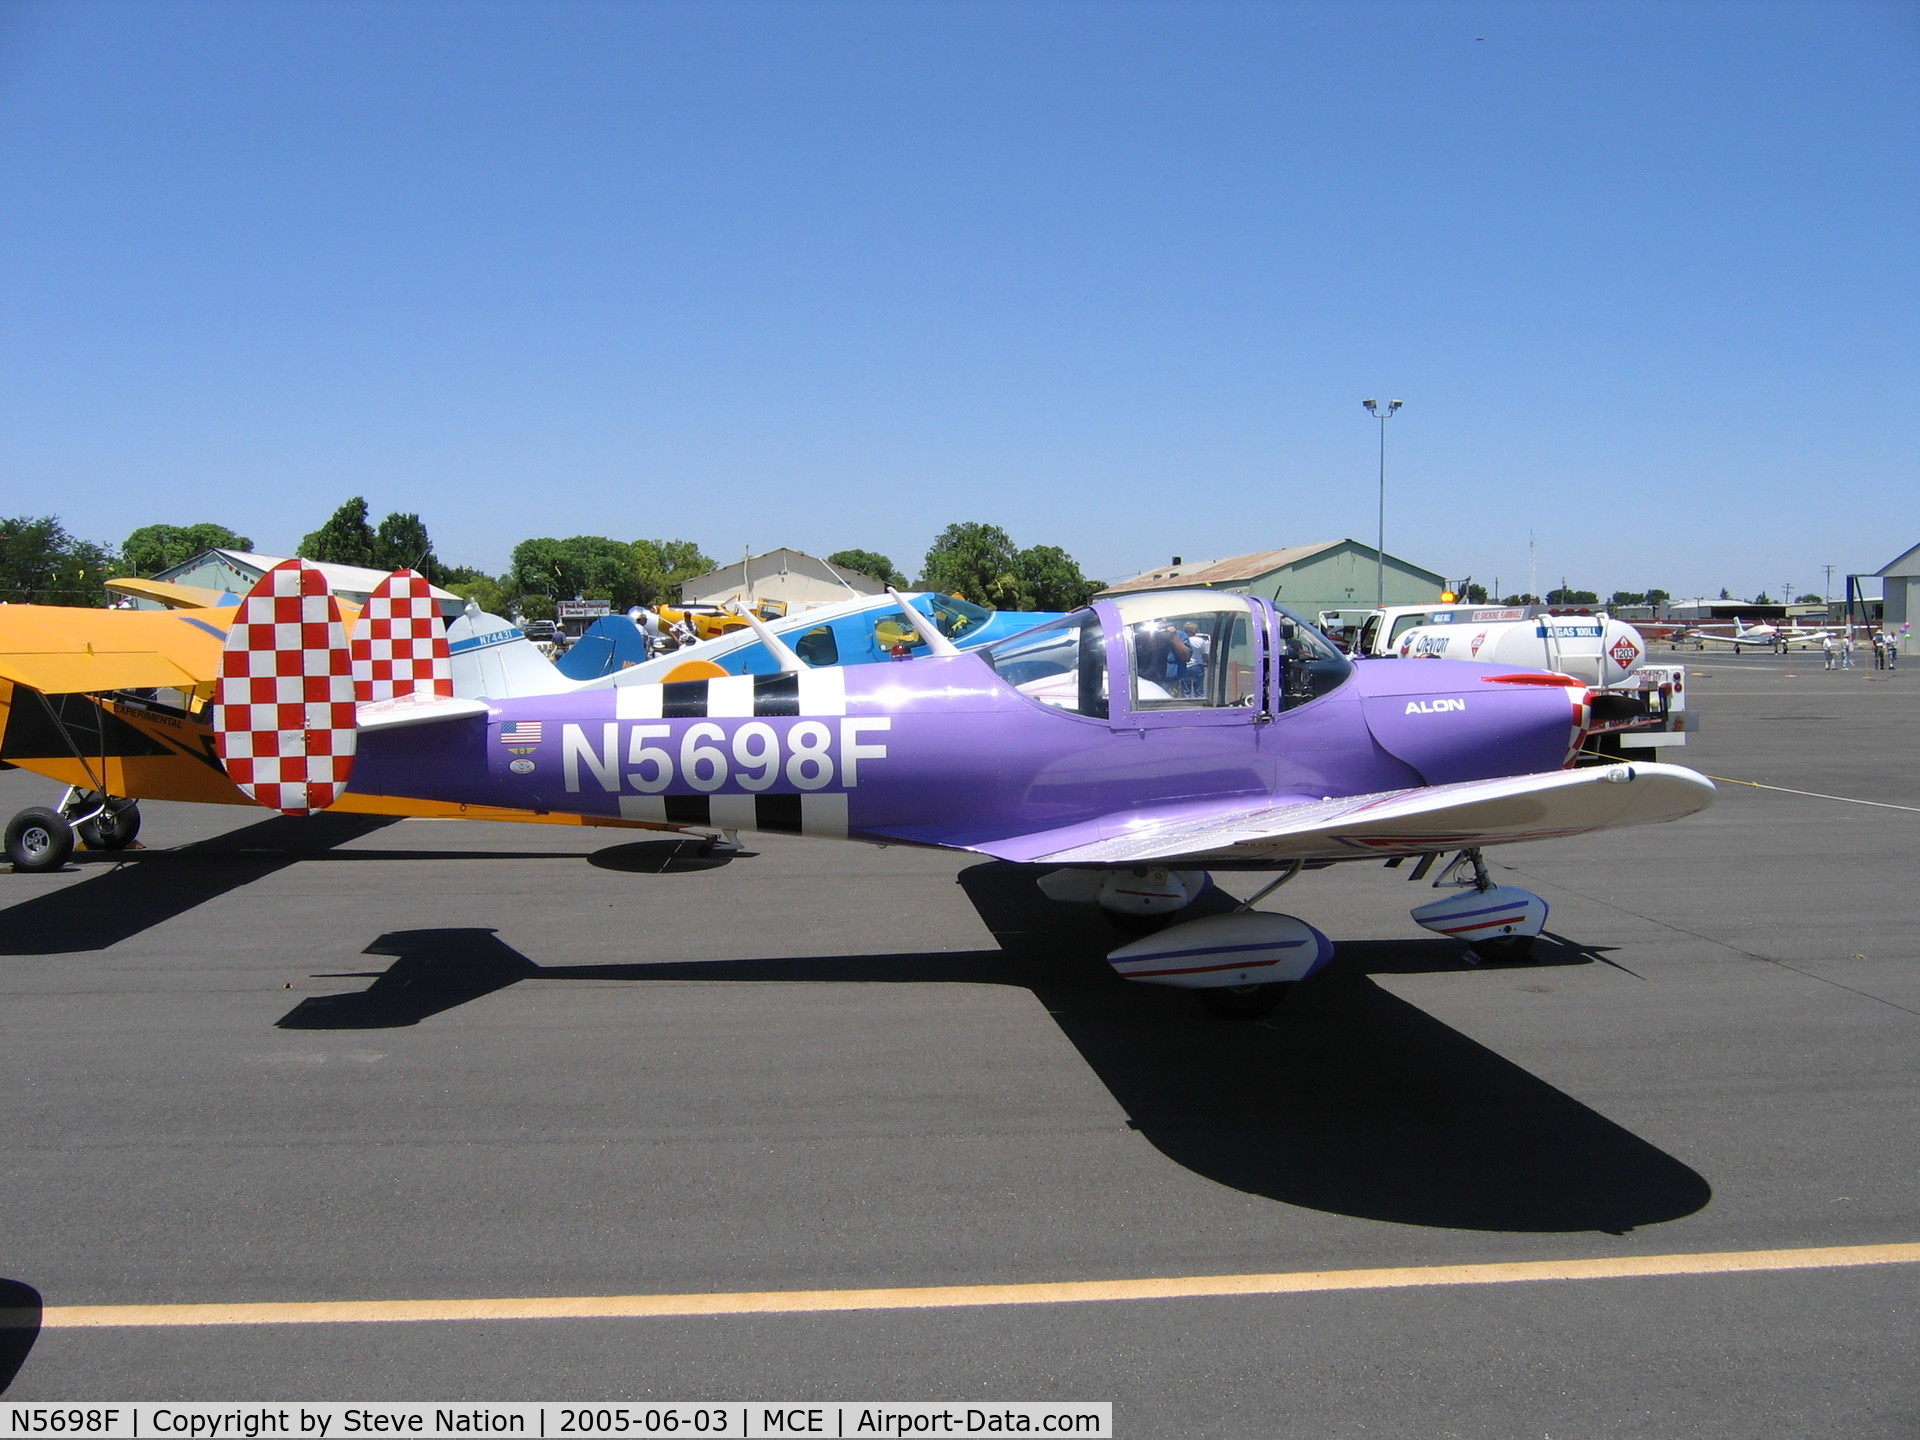 N5698F, 1966 Alon A2 Aircoupe C/N A-198, 1966 Alon A2 in purple colors with r/wh > tail & bk/w D-Day stripes at Merced, CA